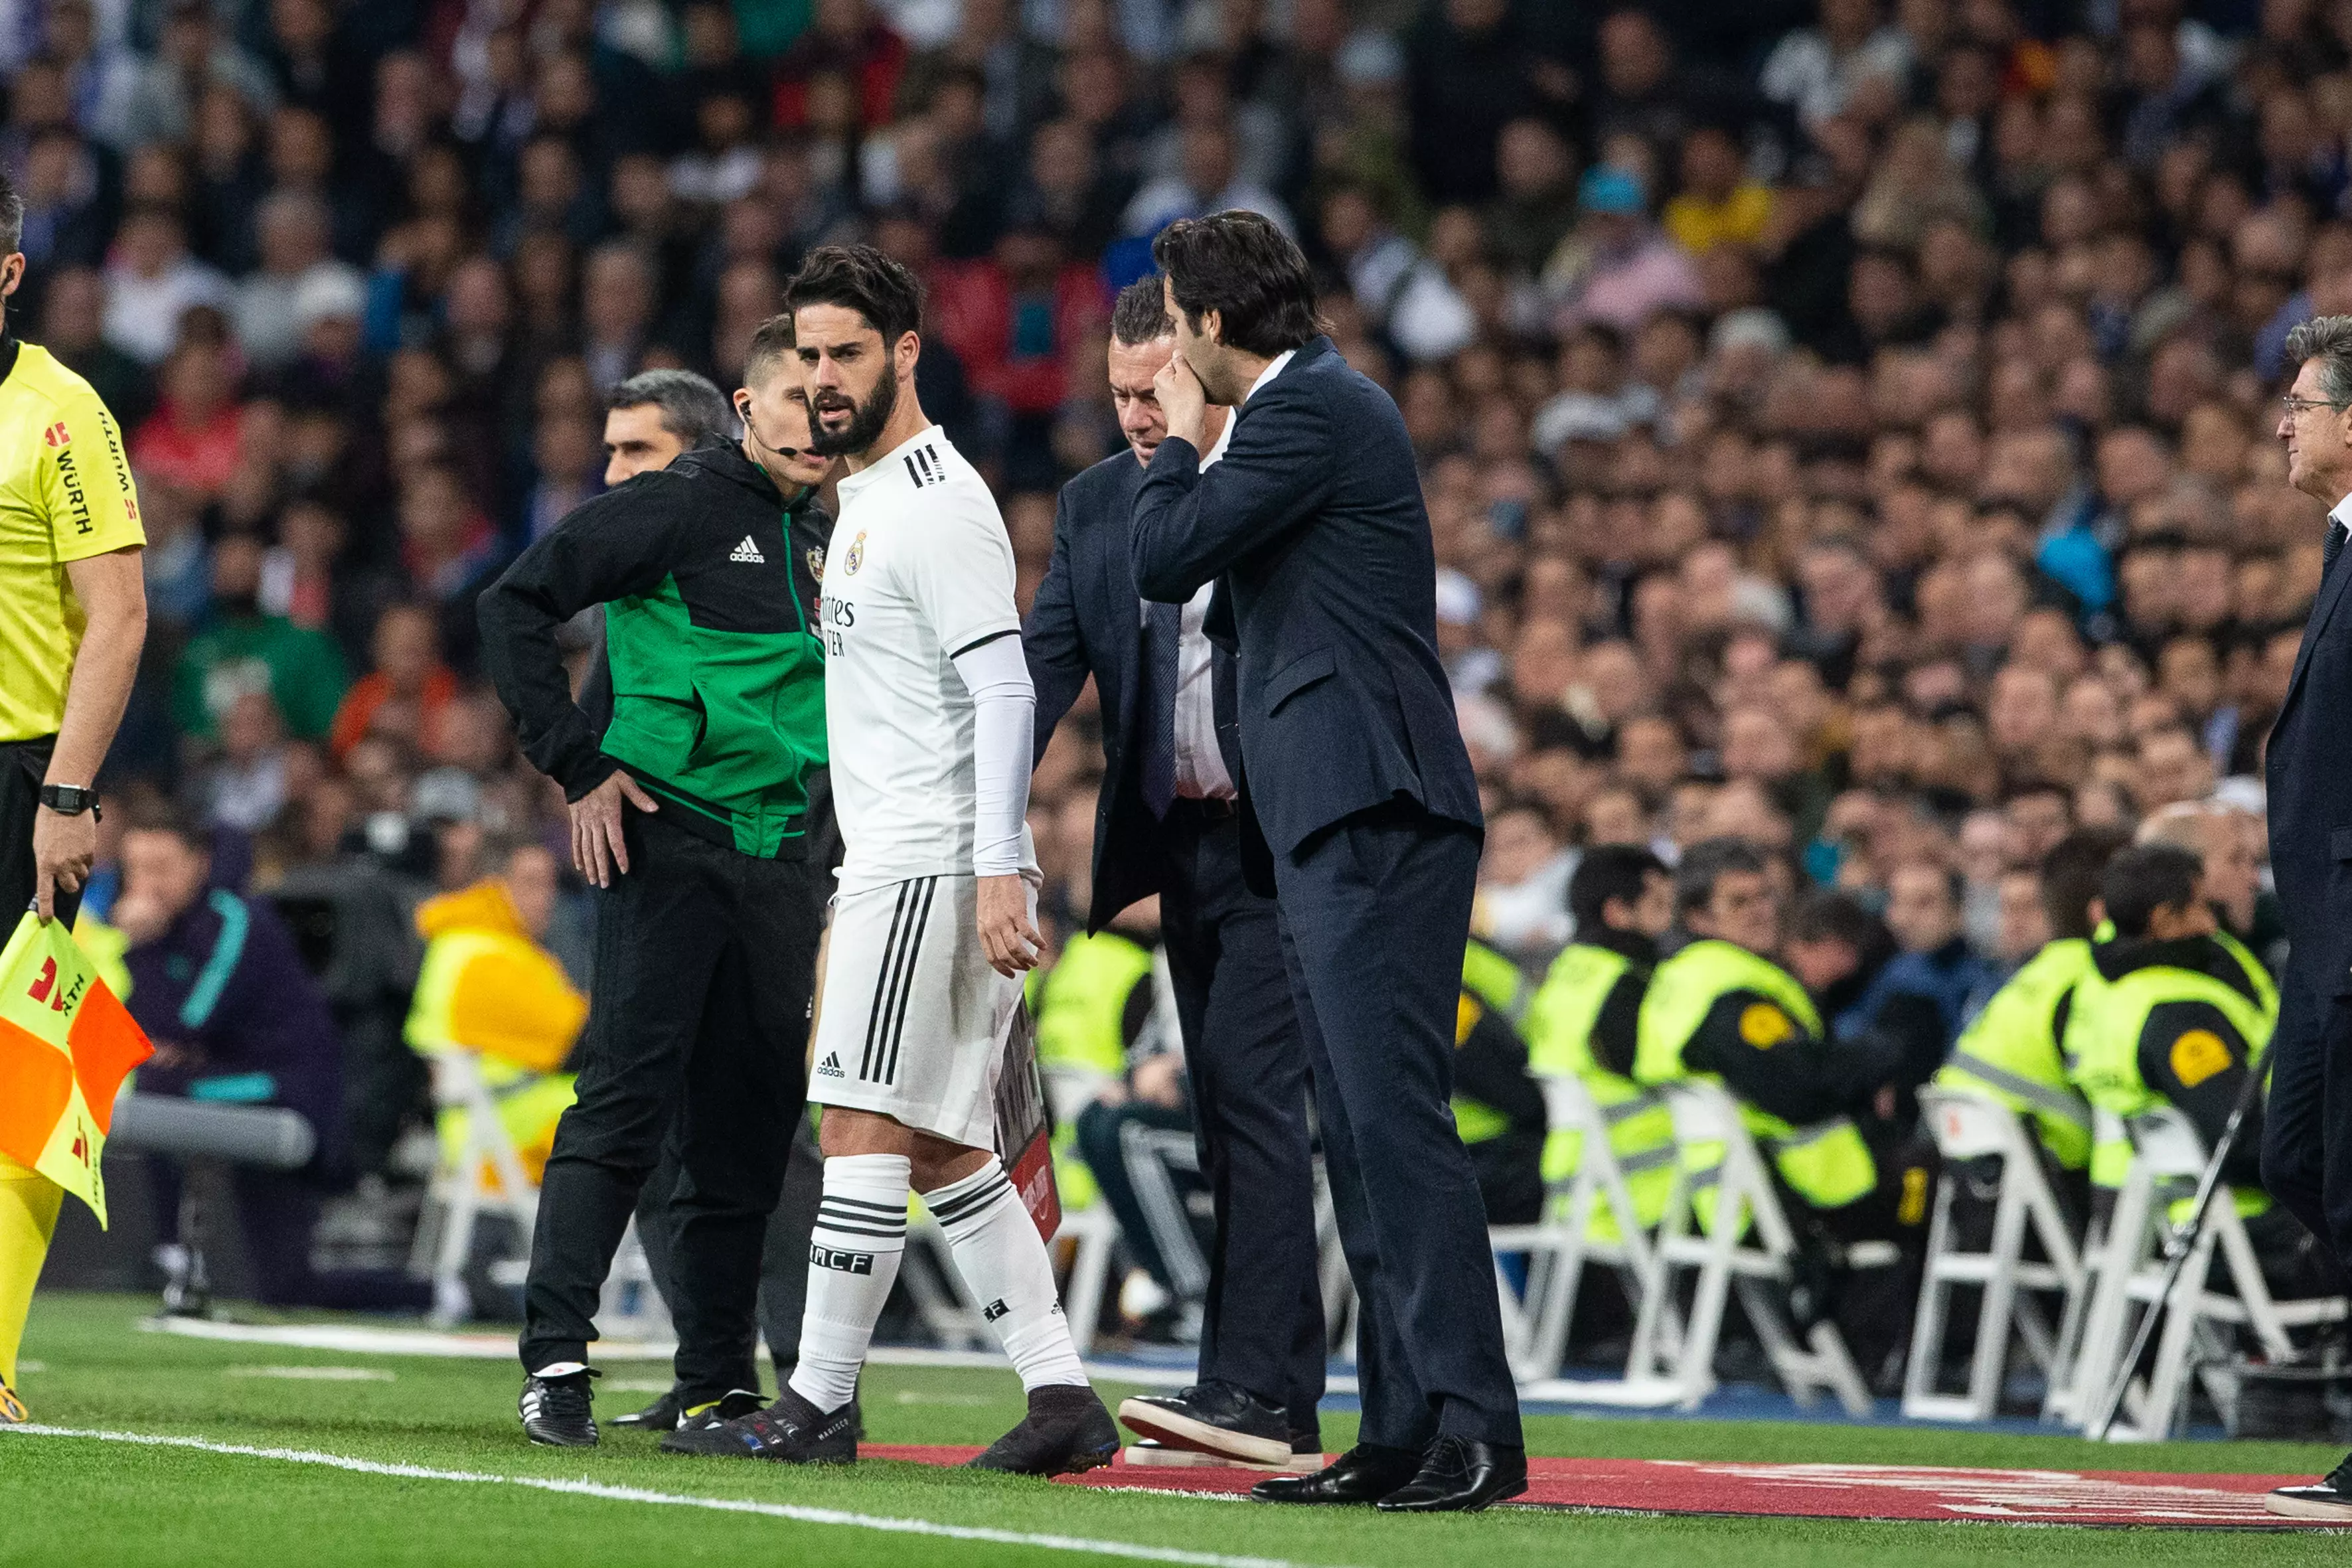 Isco came on against Barcelona and he's mainly been a substitute under Solari. Image: PA Images